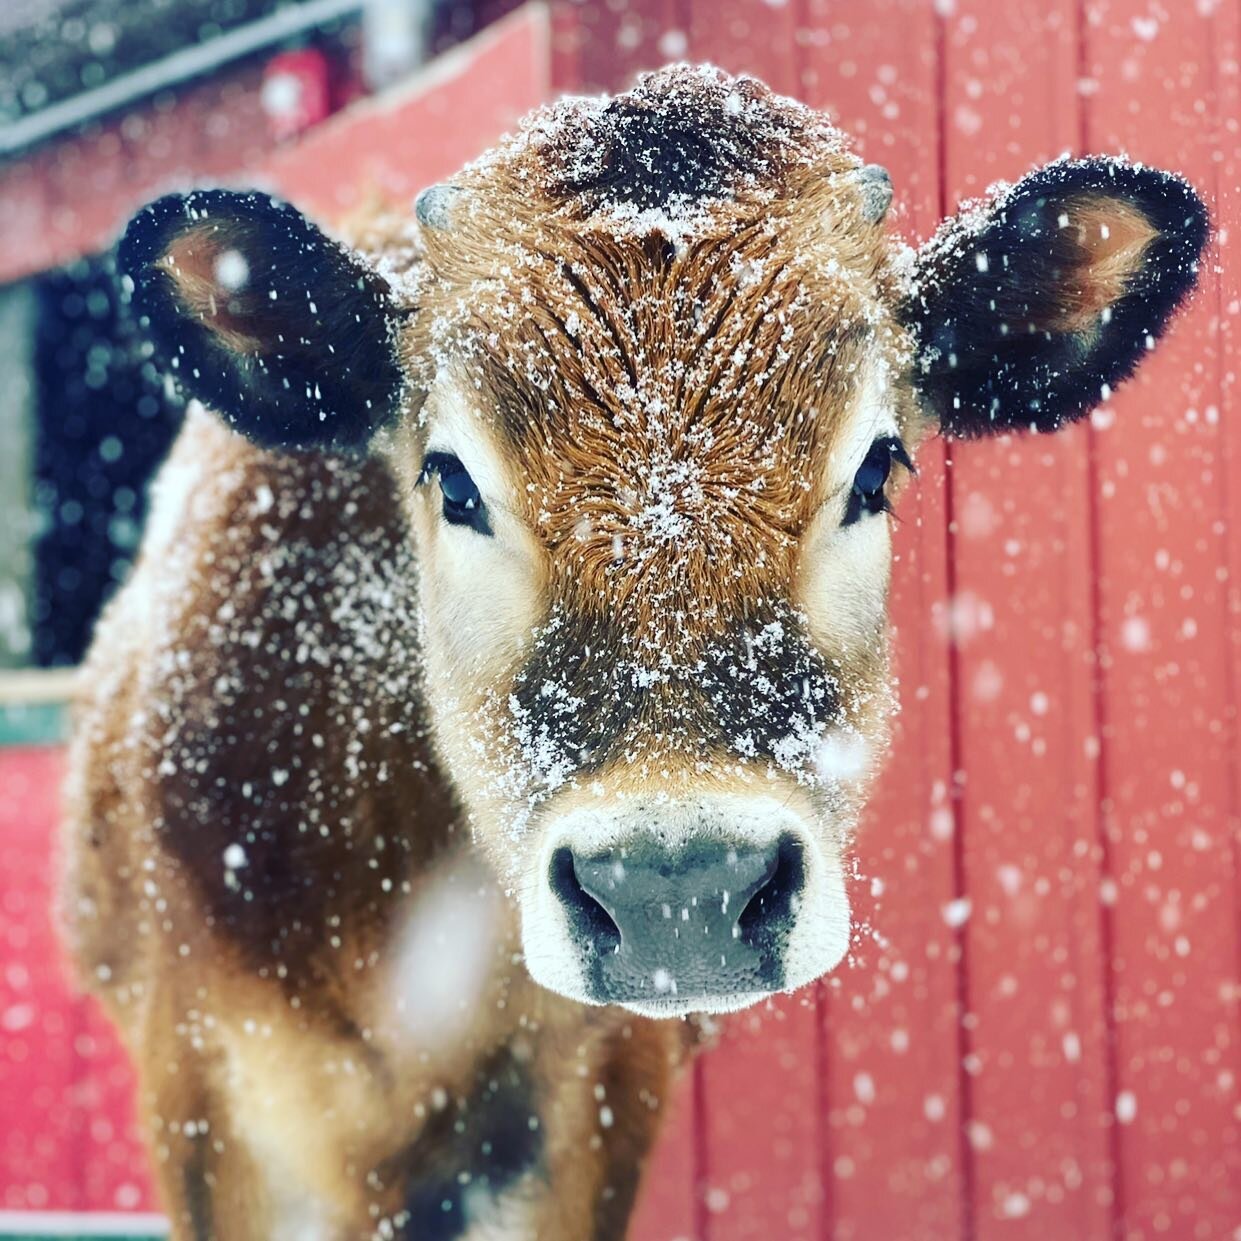 Our Horse &amp; Farm Animal Tours will resume in March 2023.  We look forward to seeing you all then!  Have a wonderful holiday season and a very happy &quot;moooooo&quot; year!